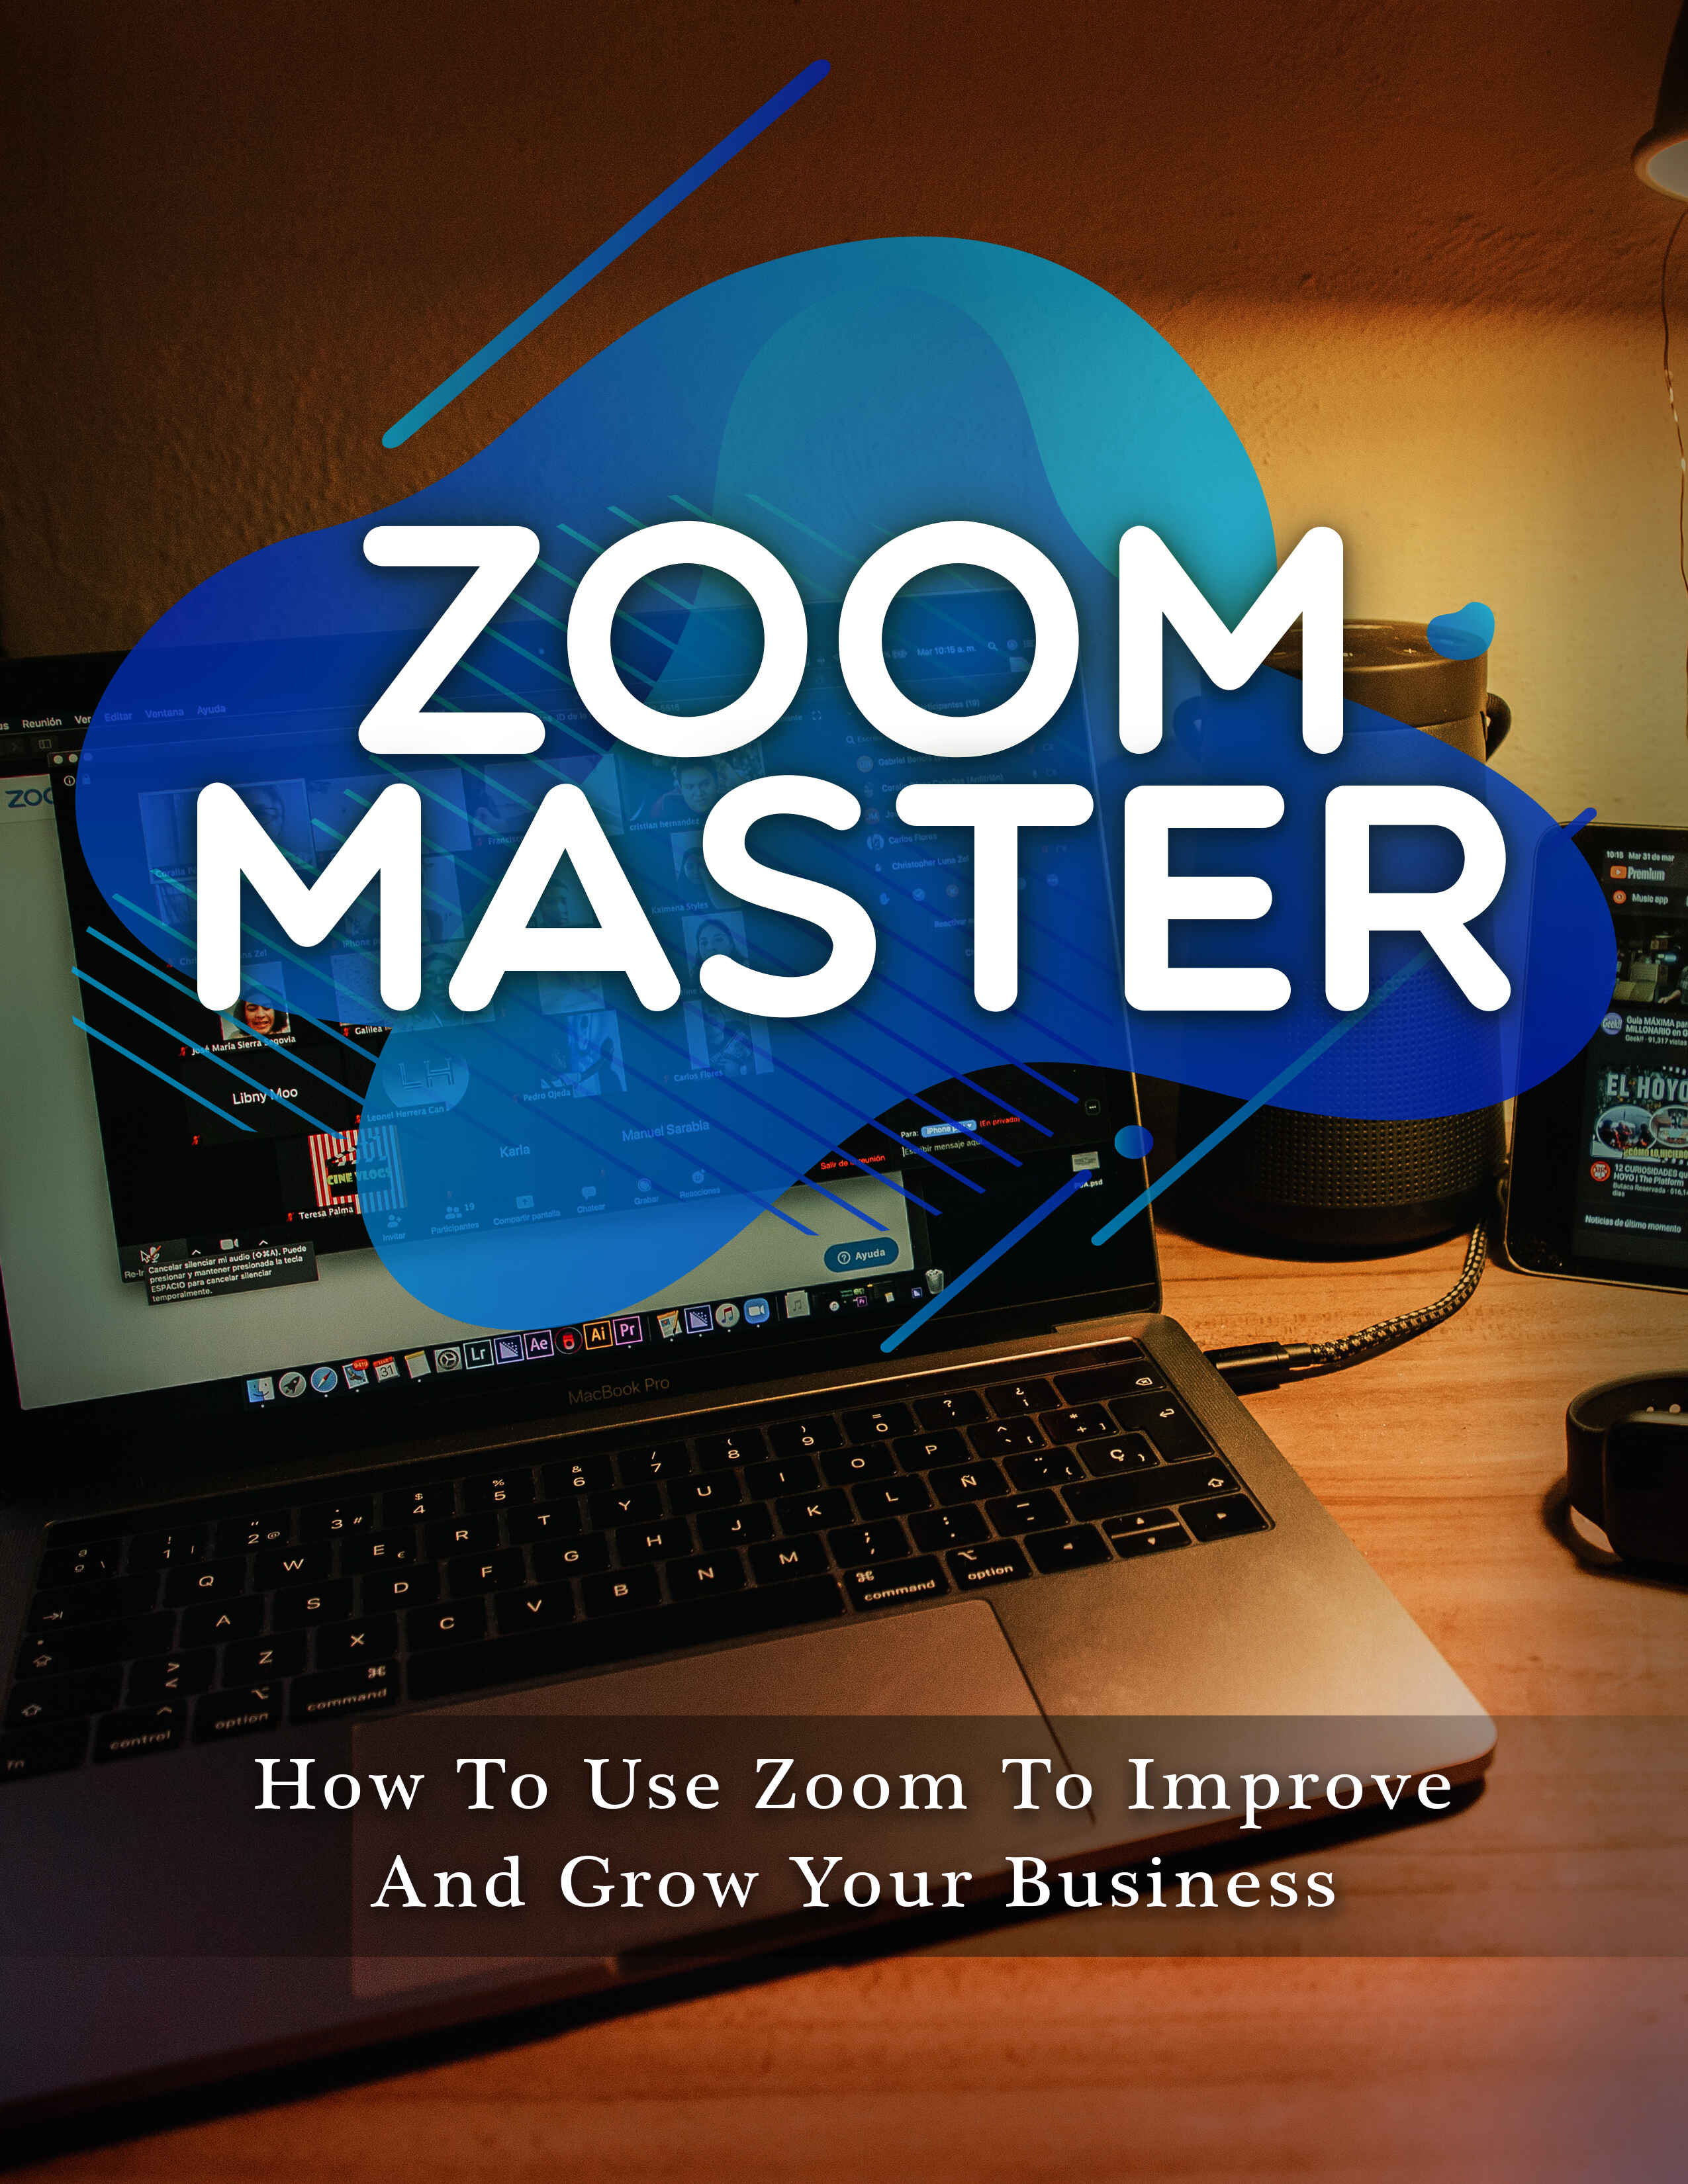 Zoom Master (How To Use Zoom To Improve And Grow Your Business) Ebook's Book Image